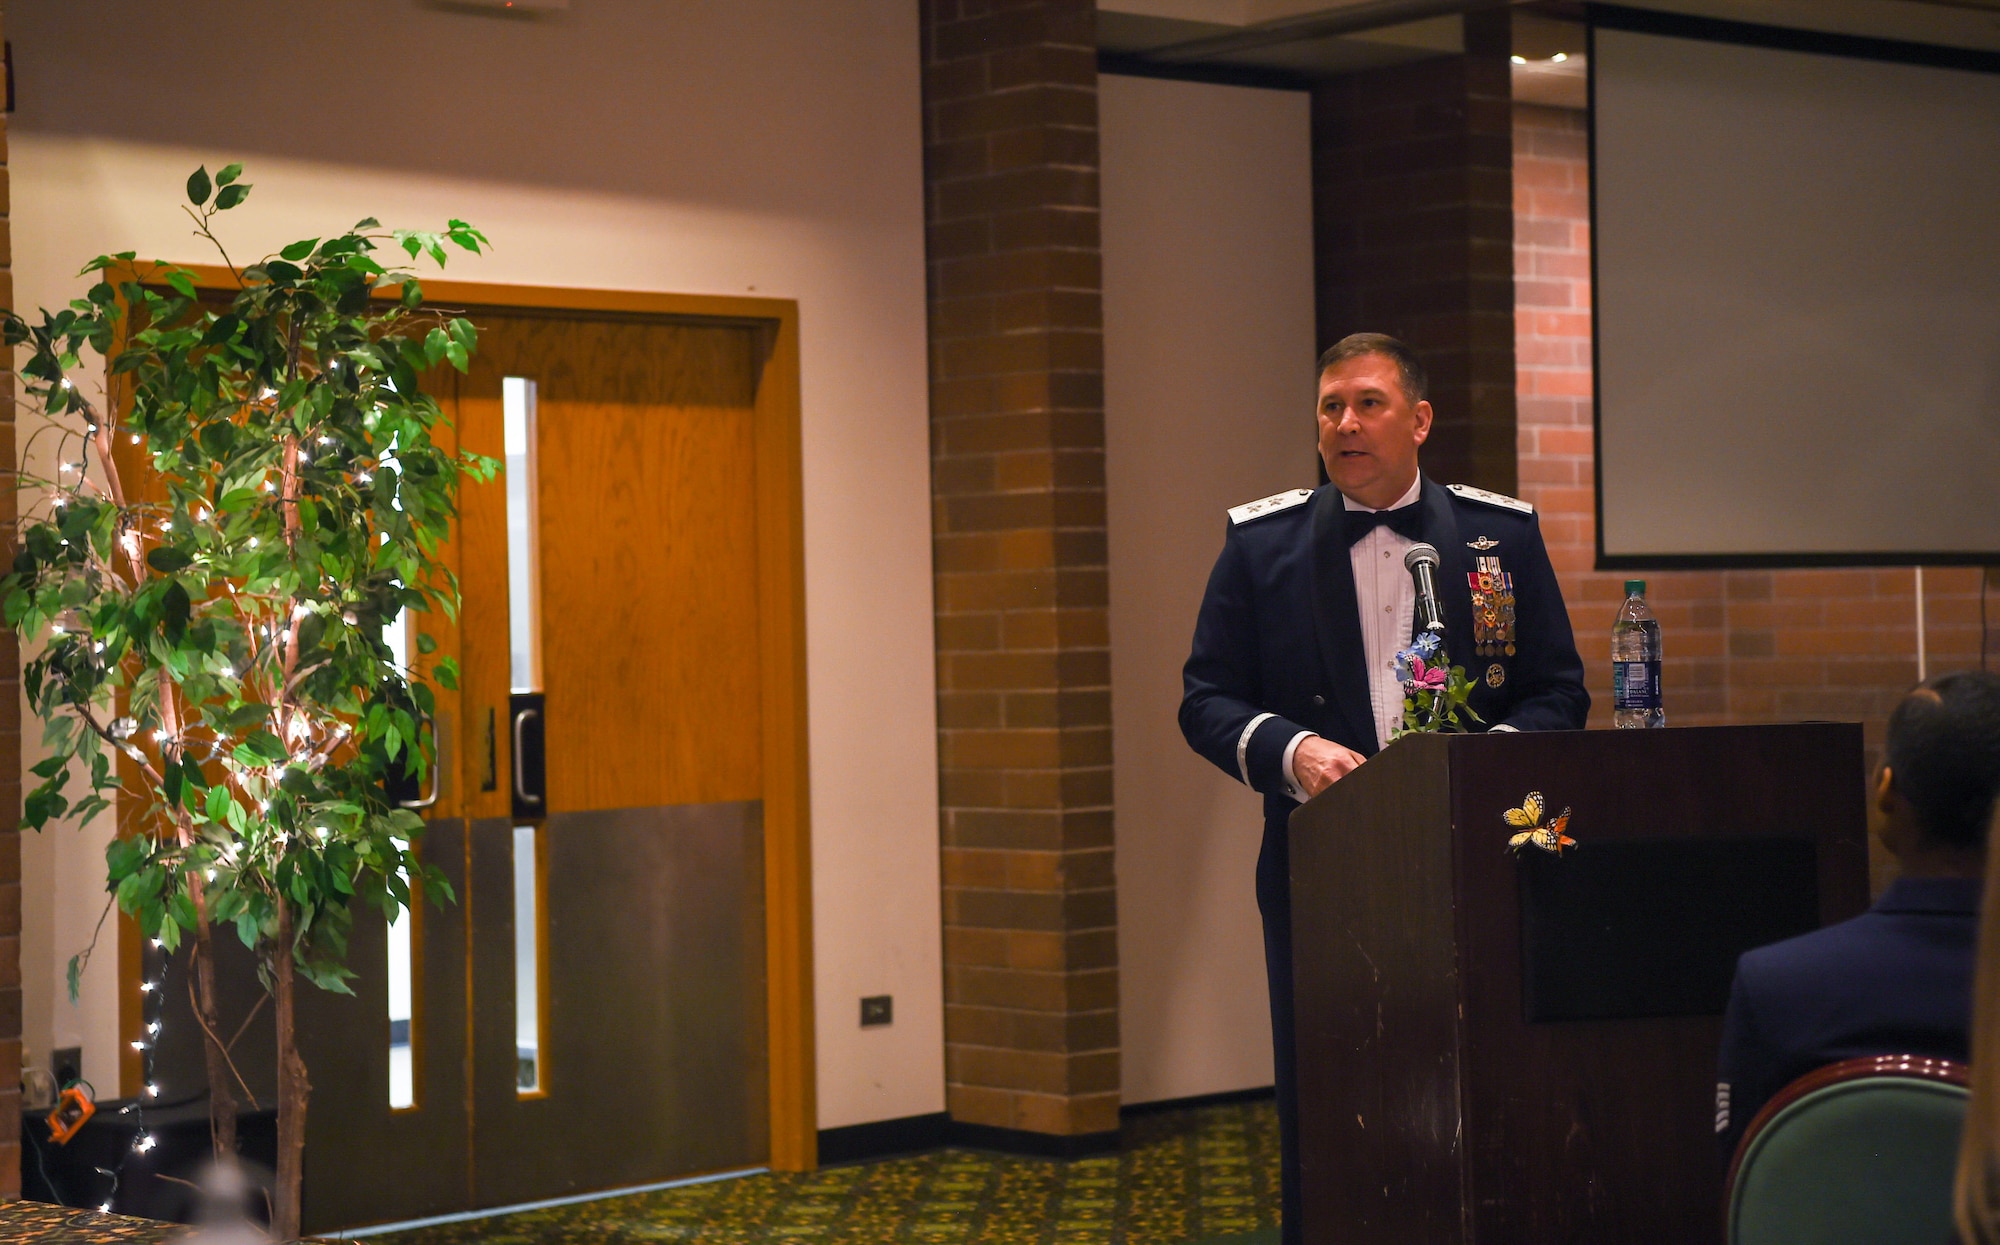 Major Gen. (Ret.) Christopher Bence, former U.S. Air Force Expeditionary Center commander, shares his insights into what it takes to be a leader during the 2018 Team McChord Annual Awards Banquet at the McChord Club, Joint Base Lewis-McChord, Wash., Feb. 22, 2019. Bence, whose career spanned three decades, was the guest speaker for the ceremony. (U.S. Air Force photo by Senior Airman Tryphena Mayhugh)